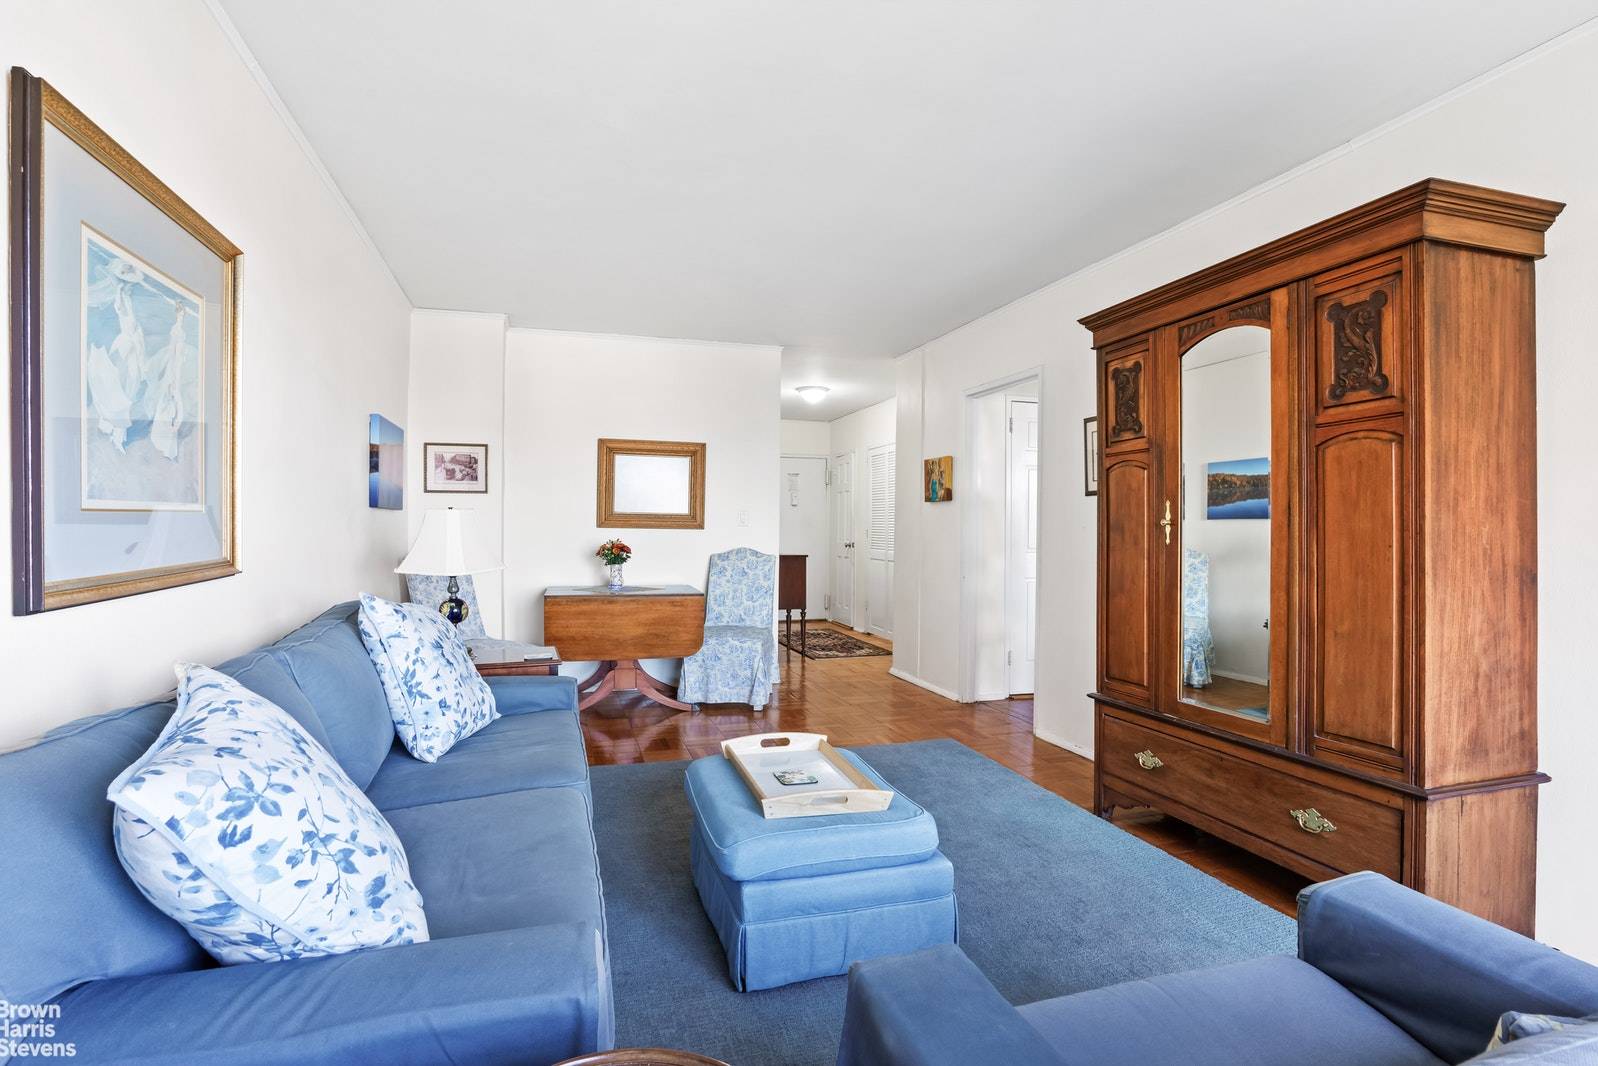 SUNDAY OPEN HOUSES ARE BY APPOINTMENT AND SLOTS MUST BE BOOKED IN ADVANCEInviting, airy one bedroom efficiency apartment with sunny eastern exposures !